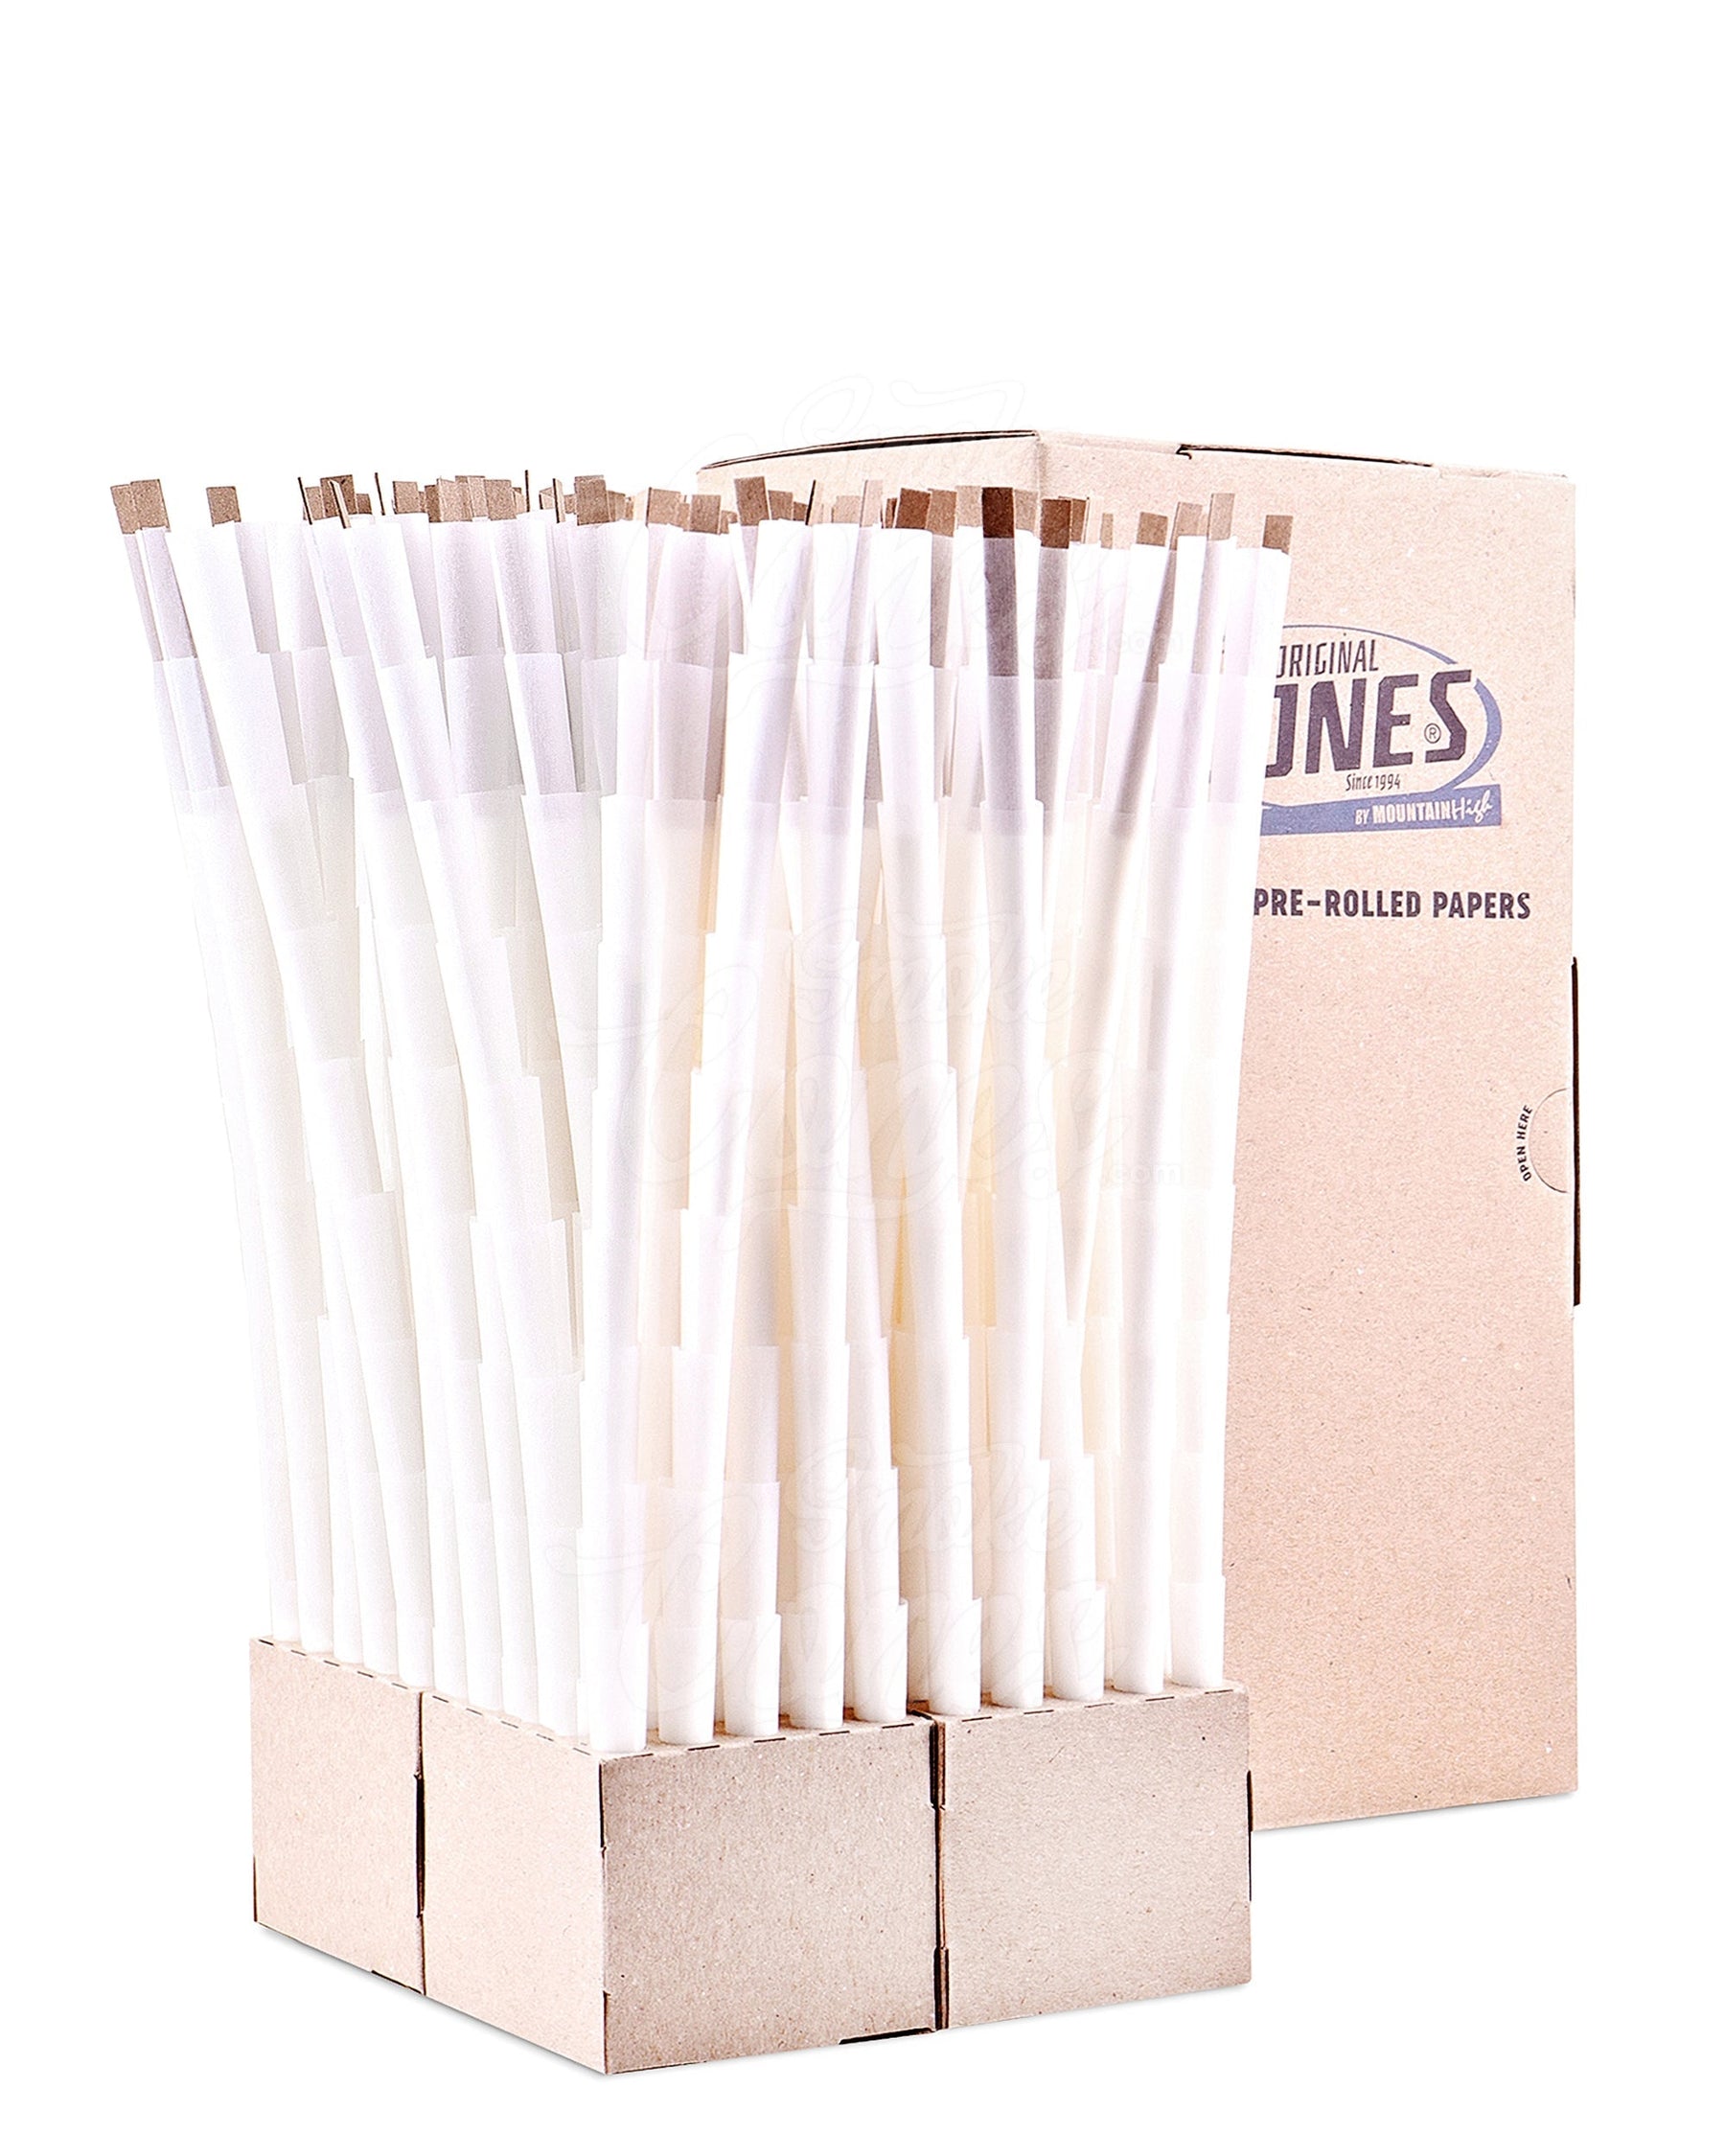 The Original Cones 109mm King Slim Size Bleached White Paper Pre Rolled Cones w/ Filter Tip 1000/Box